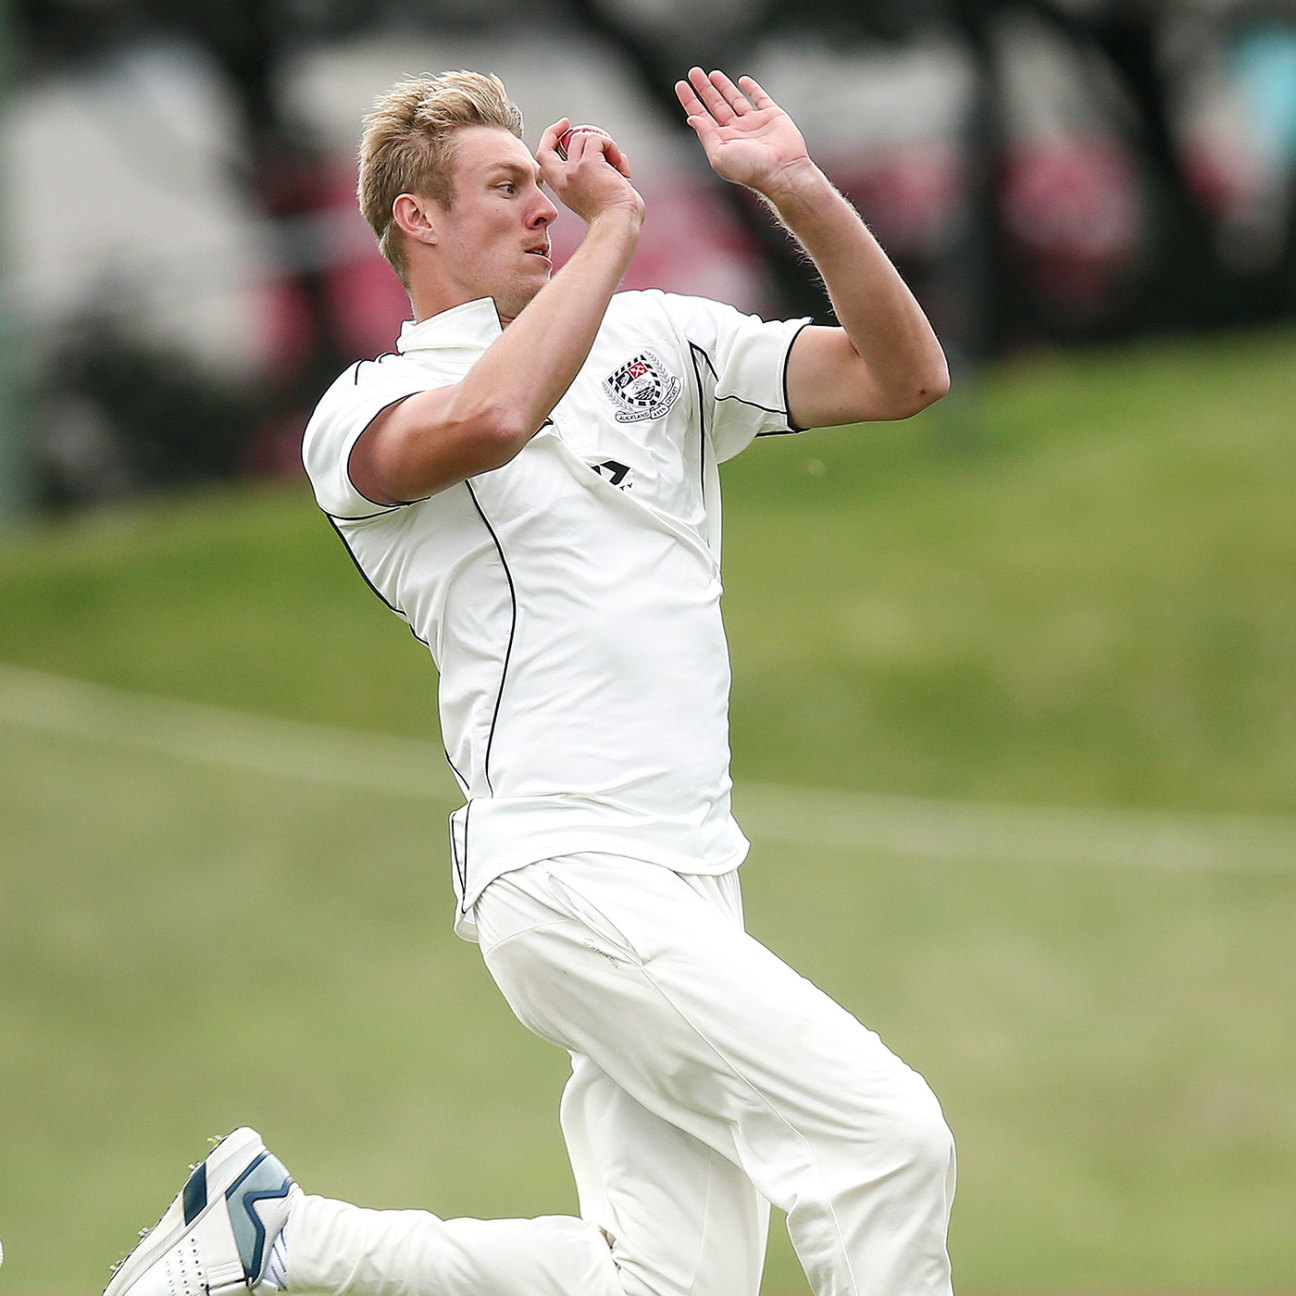 Uncapped Kyle Jamieson earns first call-up as New Zealand go for height